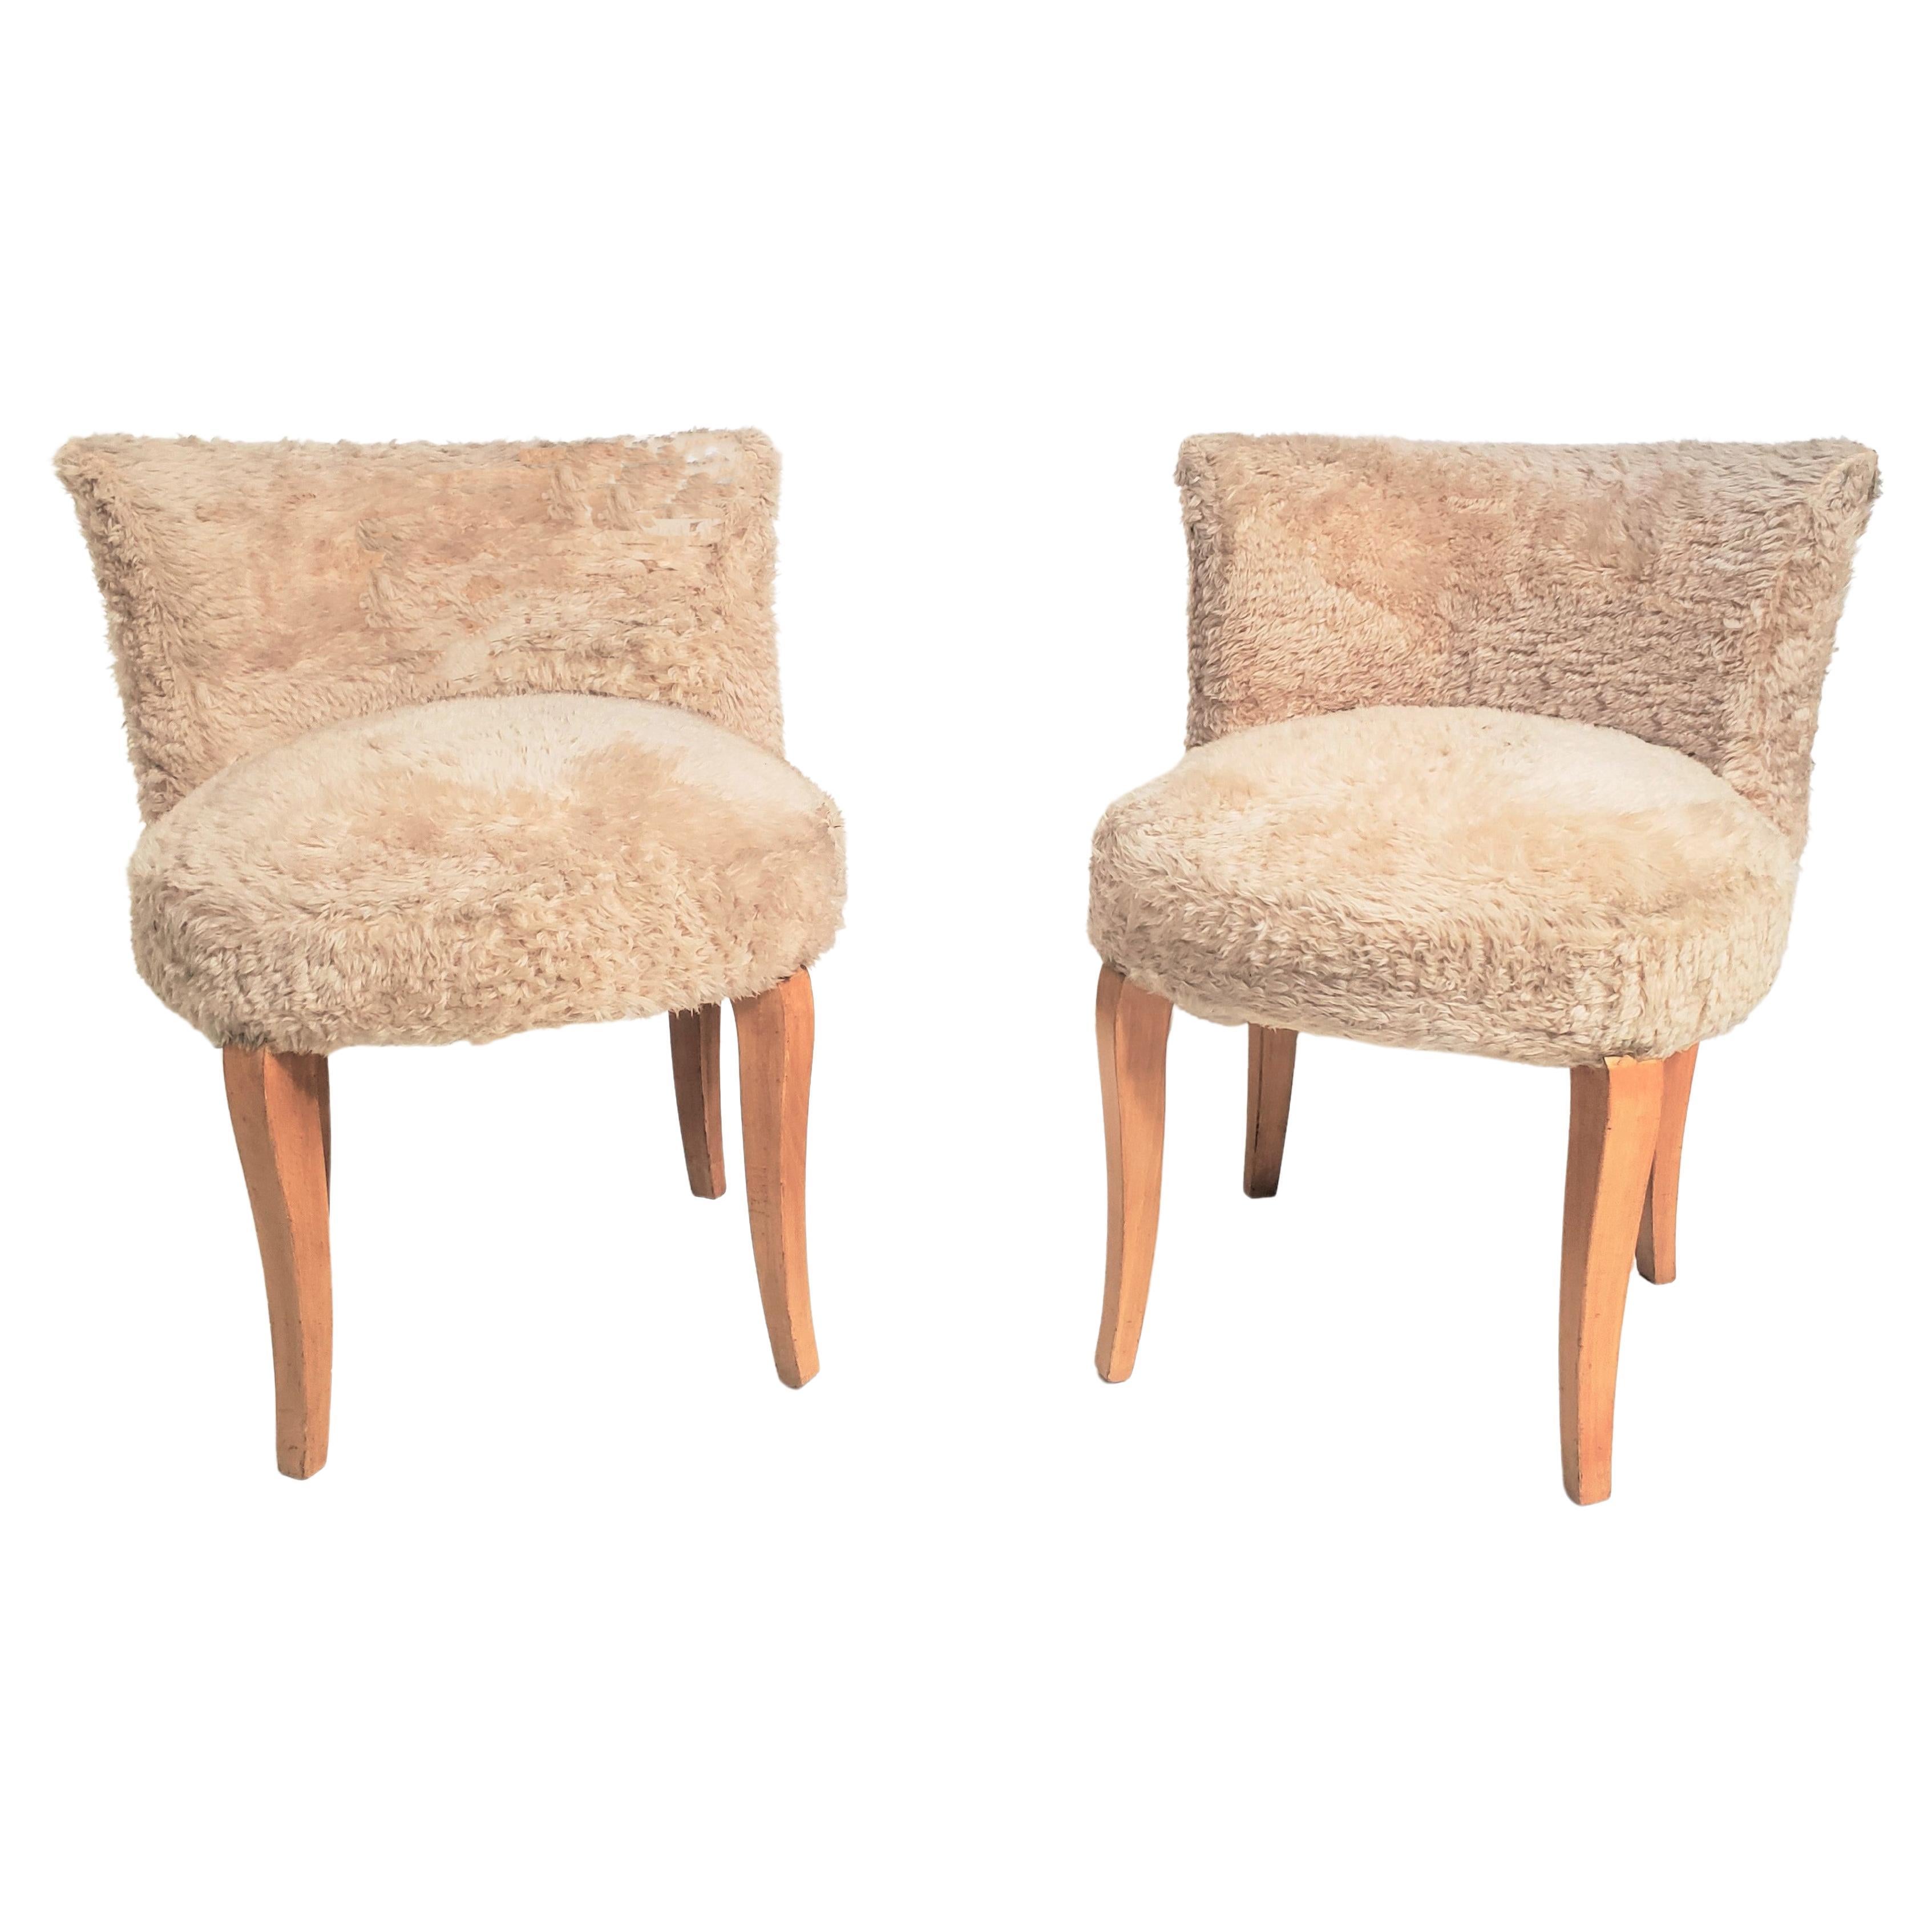 Pair of French 1940s petite boudoir chairs. These charming accent chairs feature a curved backrest and stand gracefully on delicate sycamore wood cabriole legs, in the style of Dominique. Since they have backs, the chairs offer exceptional comfort